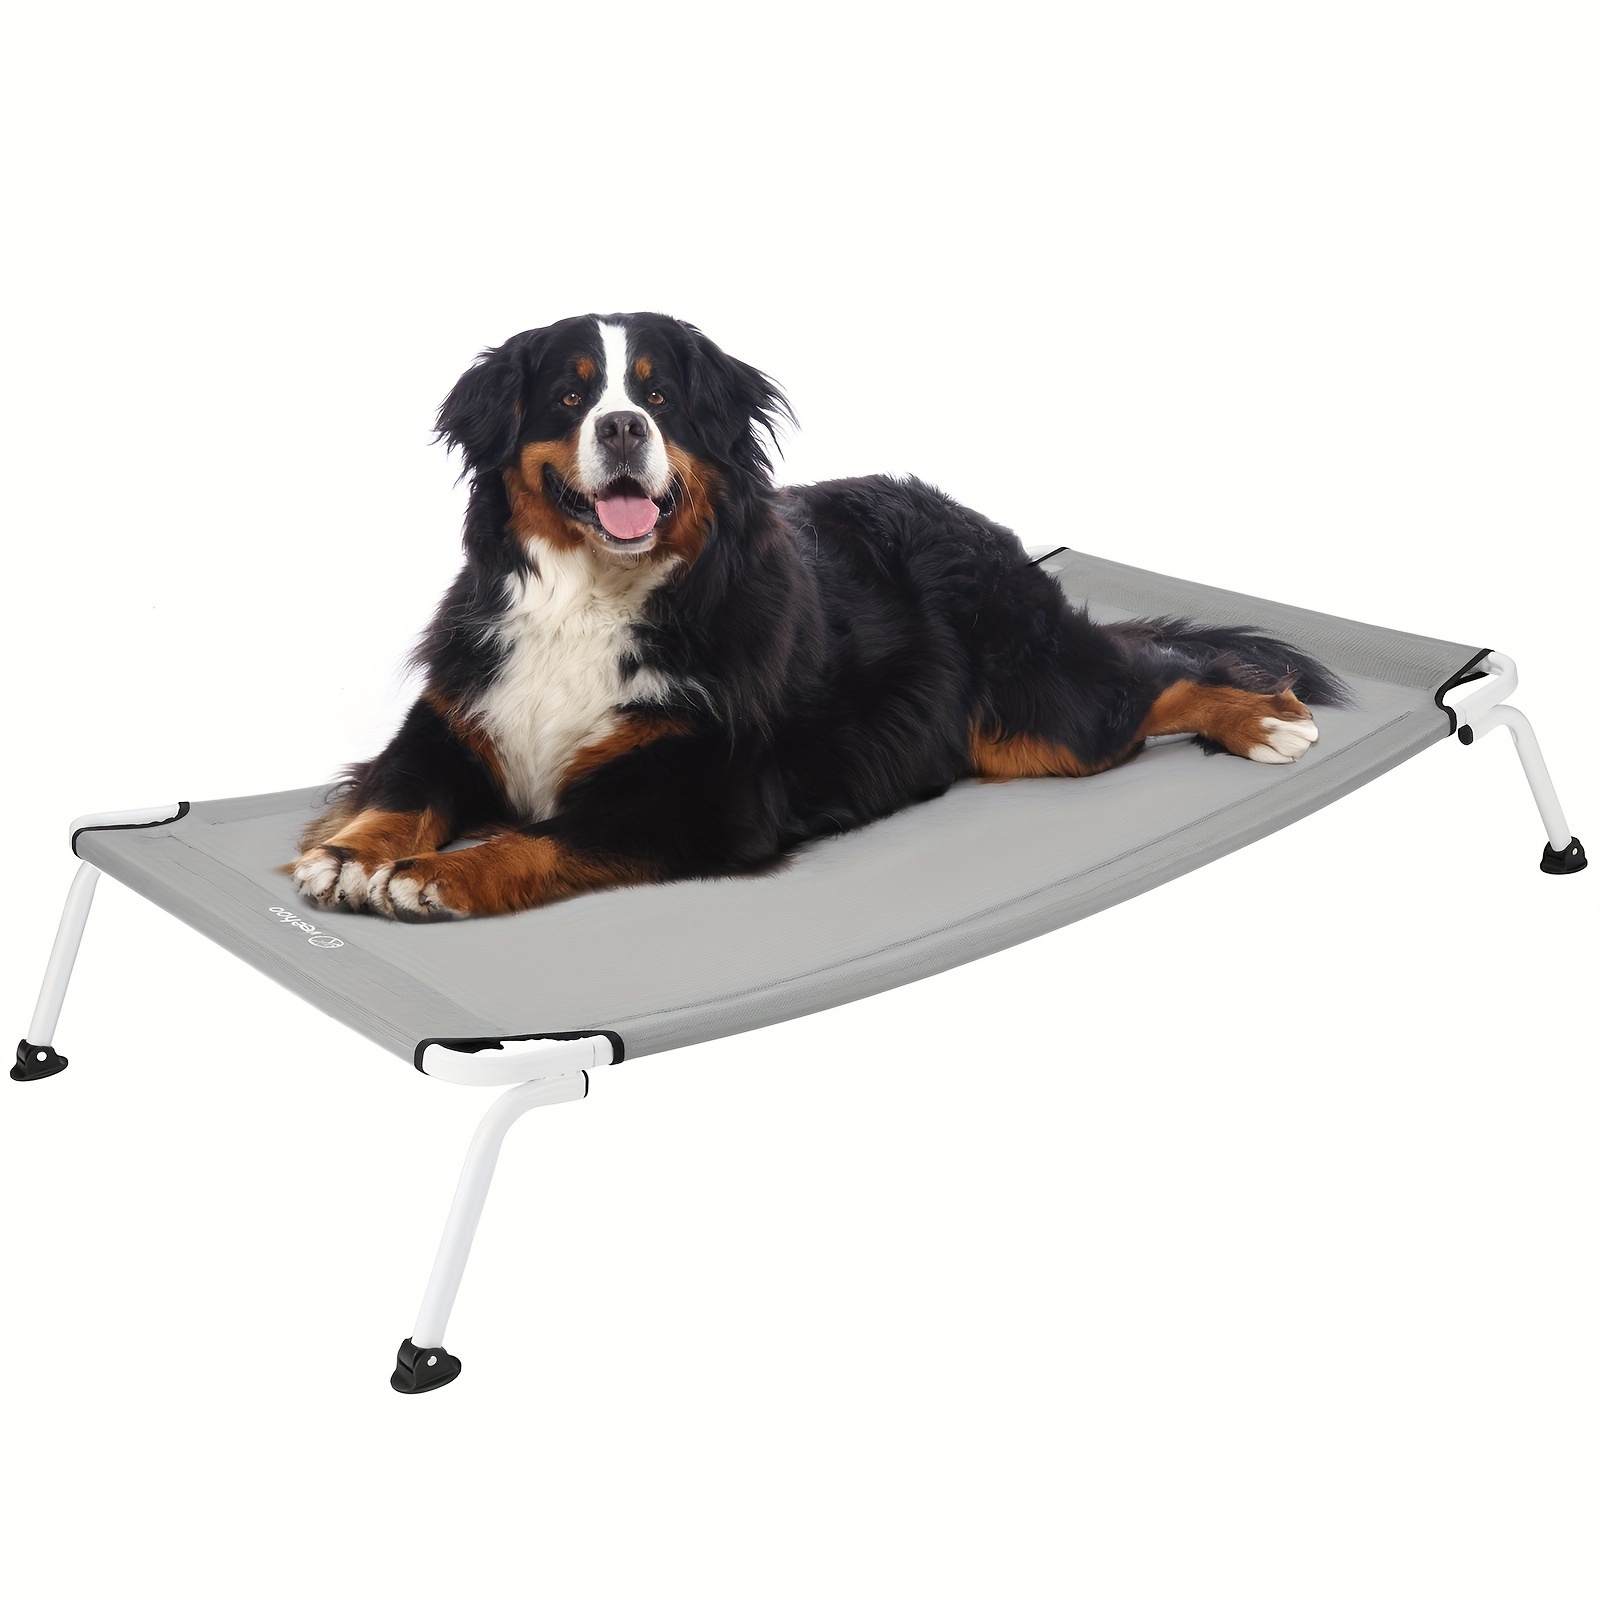 

Veehoo Curved Cooling Elevated Dog Bed, White Frame Outdoor Raised Dog Cot, Chew Proof Pet Bed With Washable & Breathable Textilene Mesh, Non-slip Feet For Indoor & Outdoor